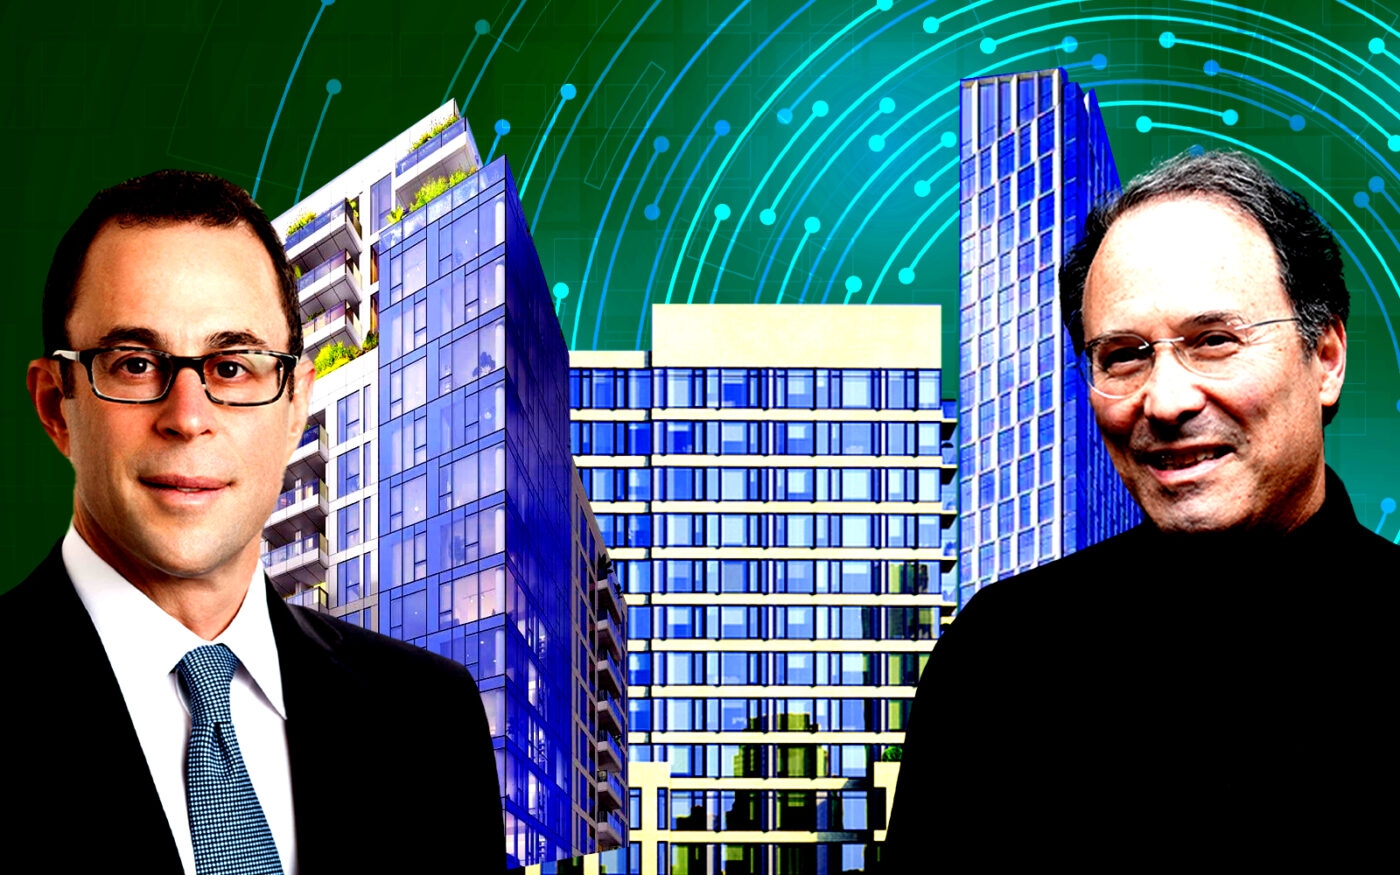 From left: Jeff Blau and Gary Barnett with 300 West 30th Street, 450 Washington, and 1 City Point